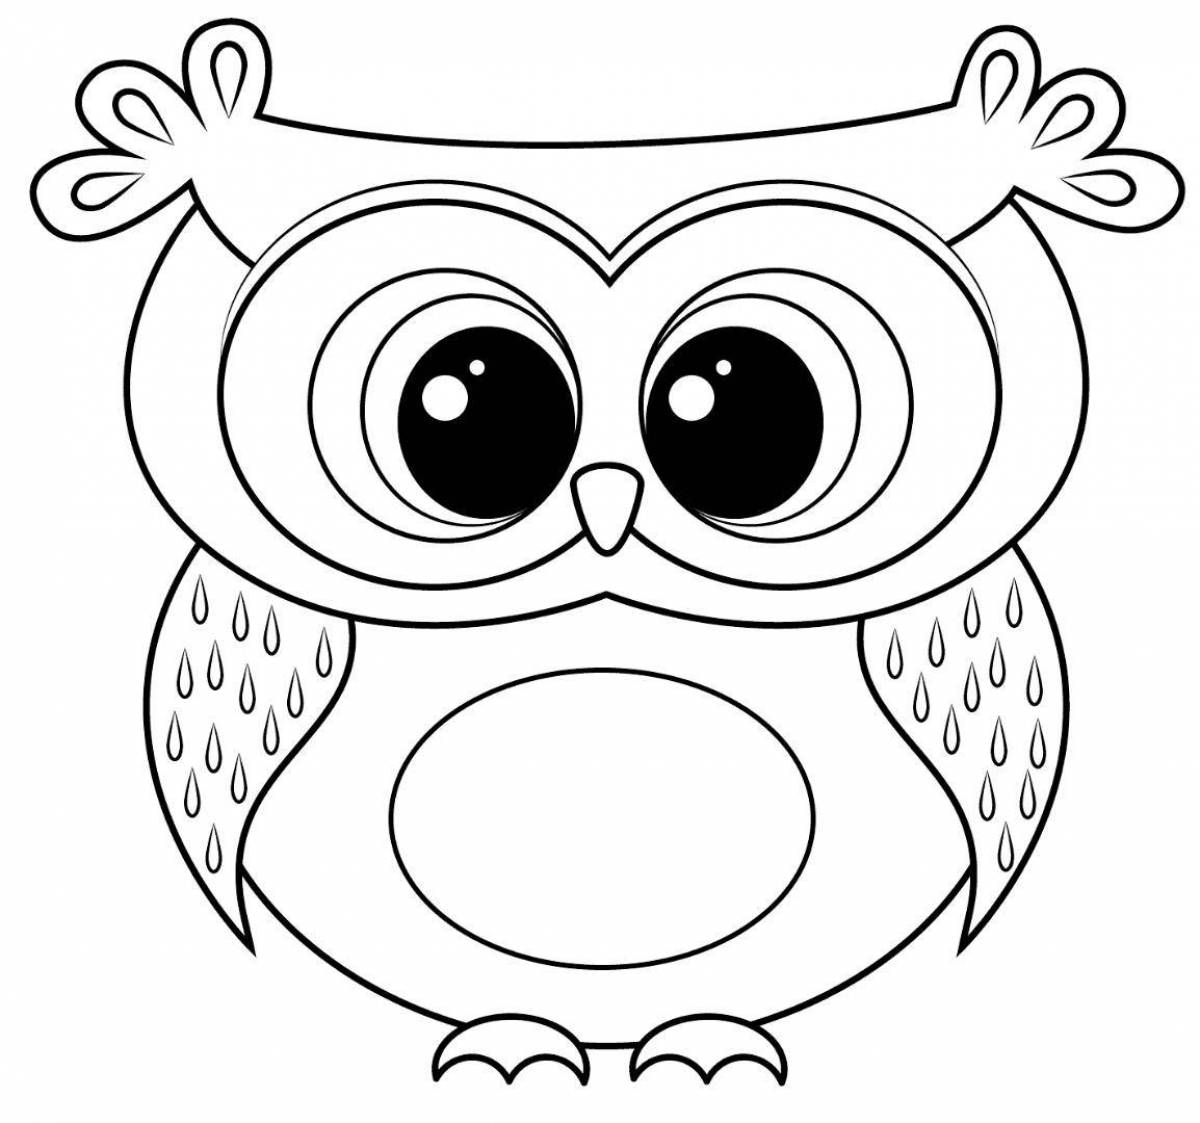 Hip-hop colorful owlet coloring page